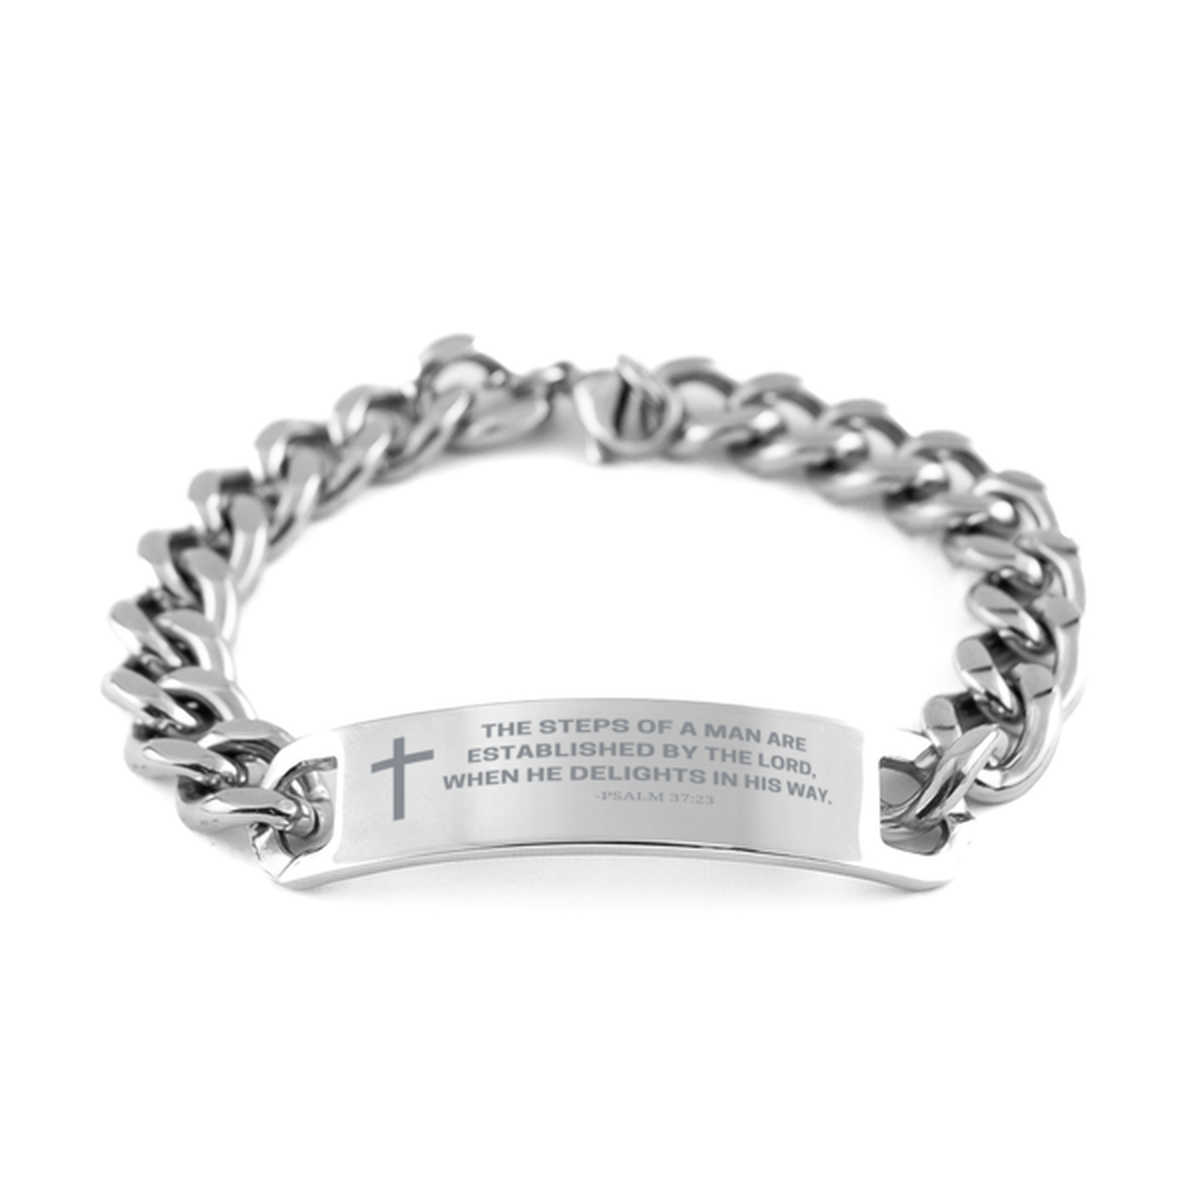 Baptism Gifts For Teenage Boys Girls, Christian Bible Verse Cuban Chain Bracelet, The steps of a man are, Catholic Confirmation Gifts for Son, Godson, Grandson, Nephew